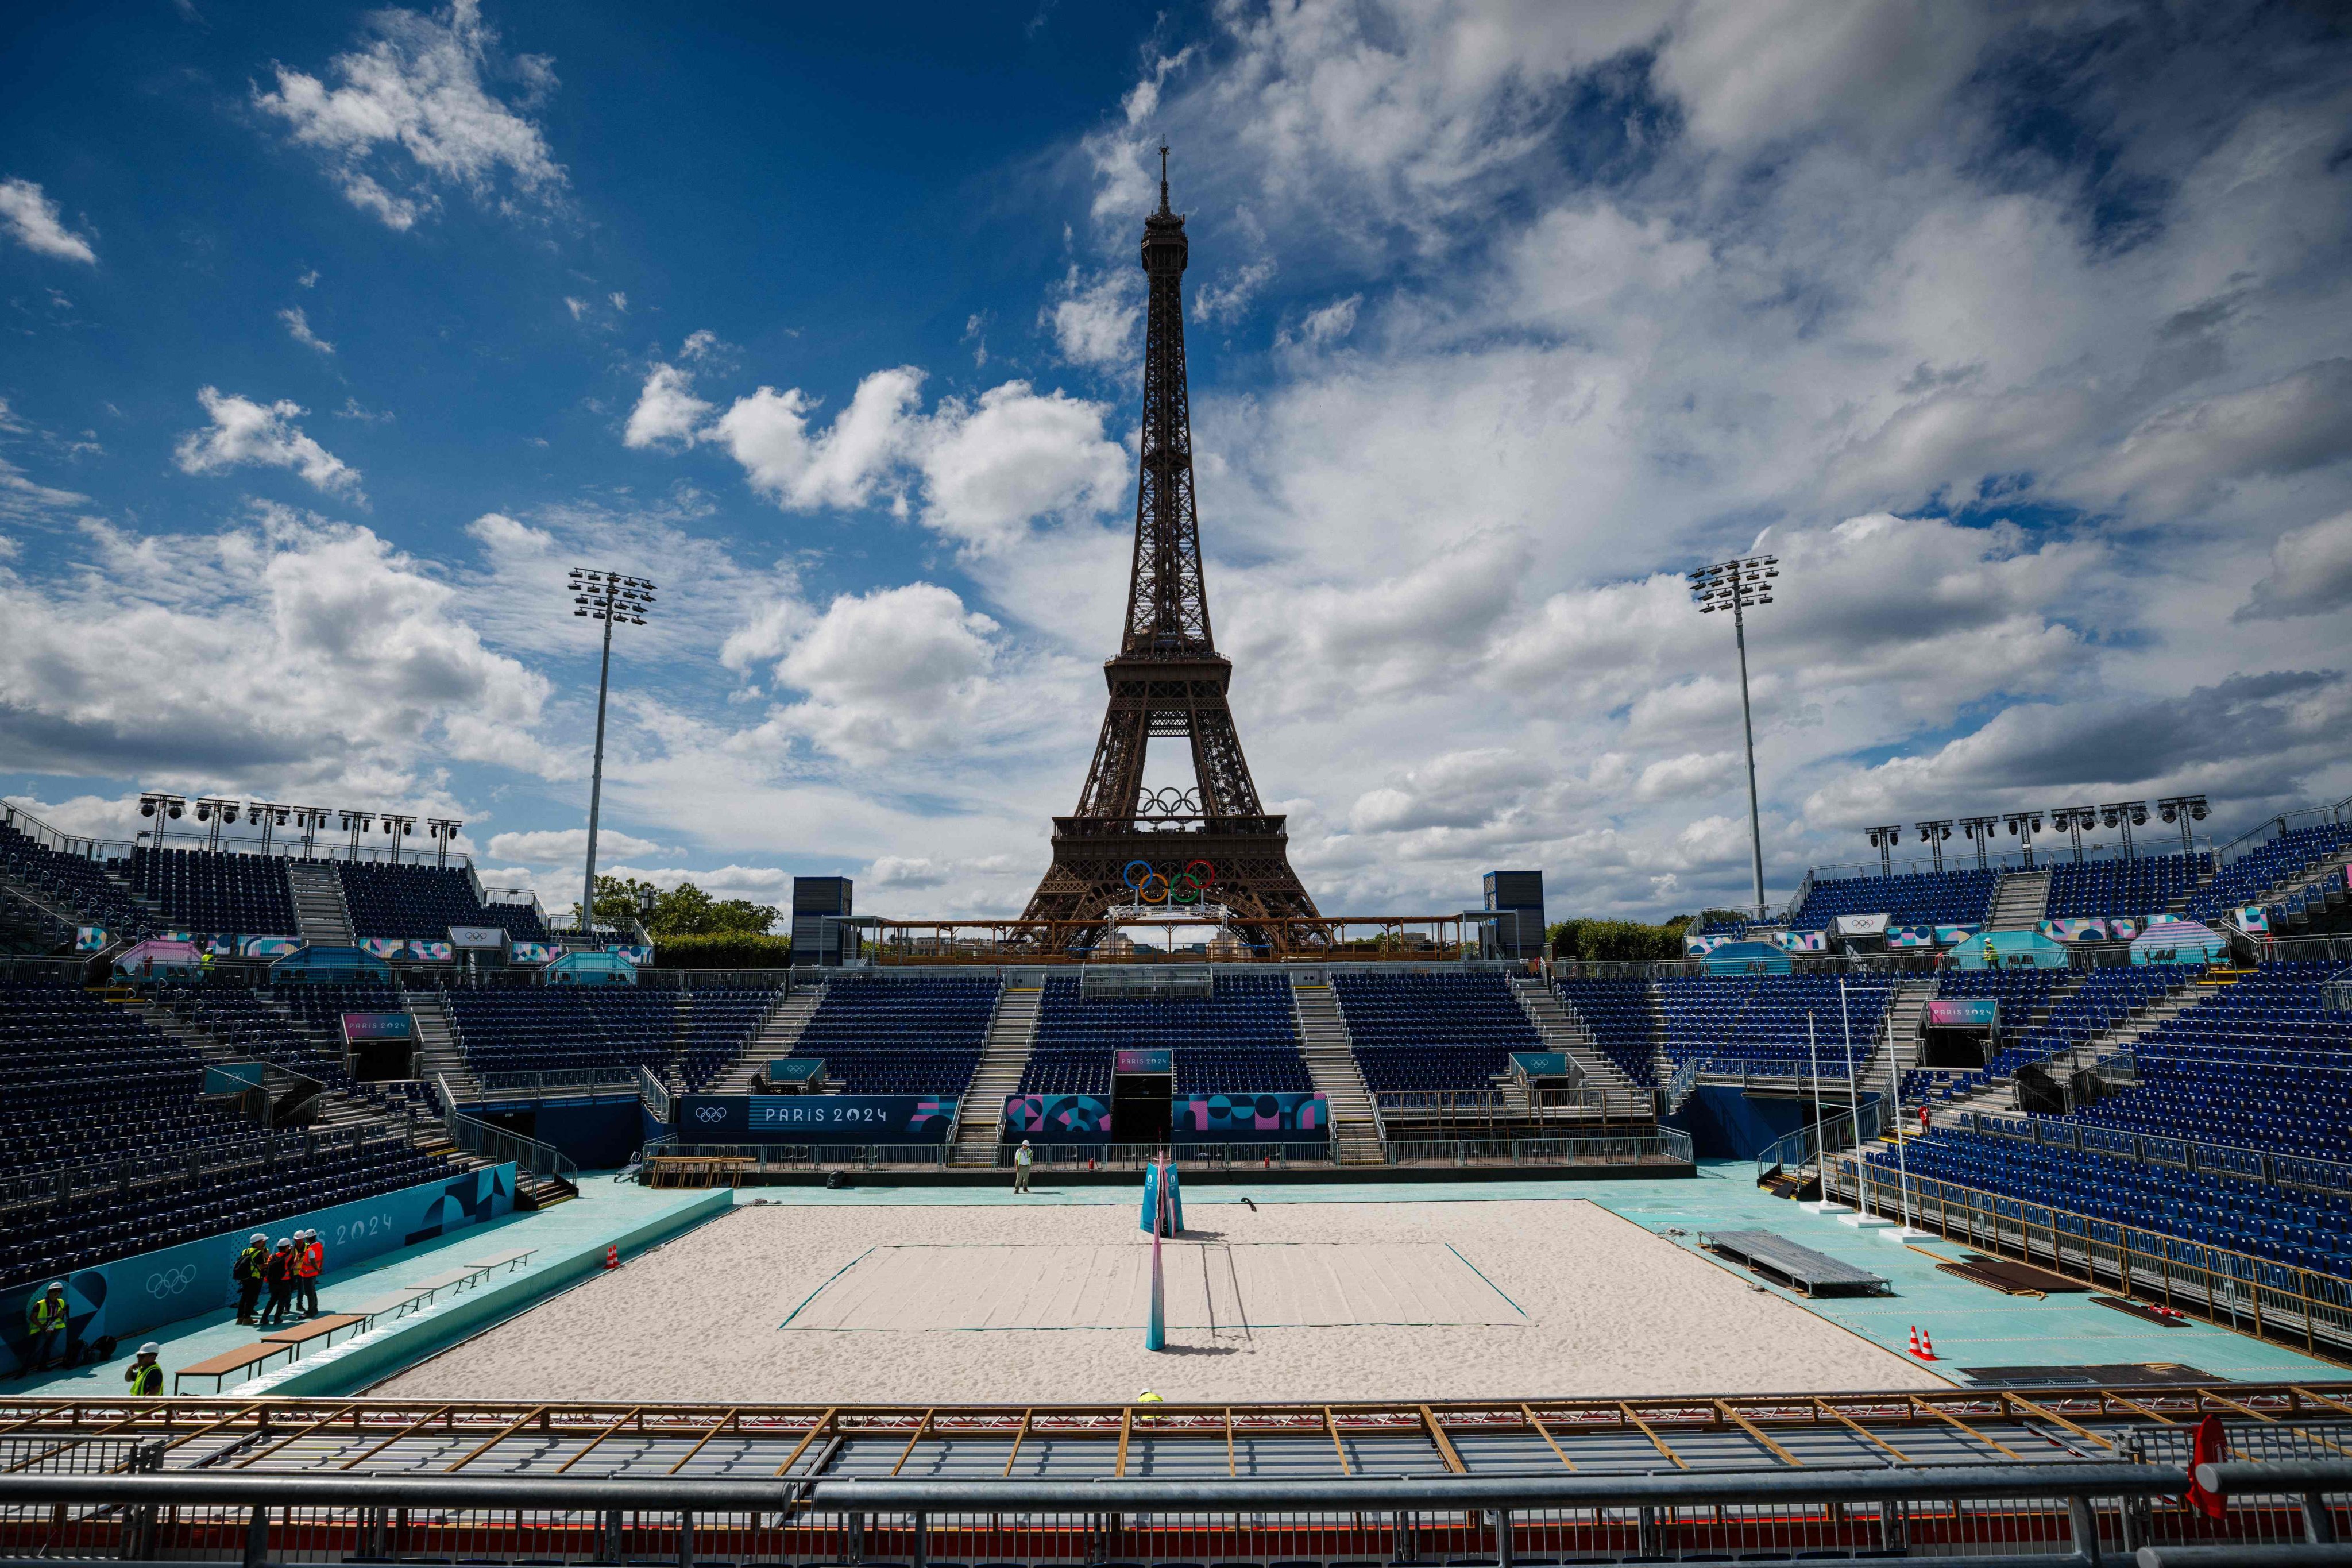 The Eiffel Tower stands behind Eiffel Tower Stadium, a venue for the Paris 2024 Olympics and Paralympic Games, at the Champ-De-Mars in Paris on July 10, 2024. Photo: AFP